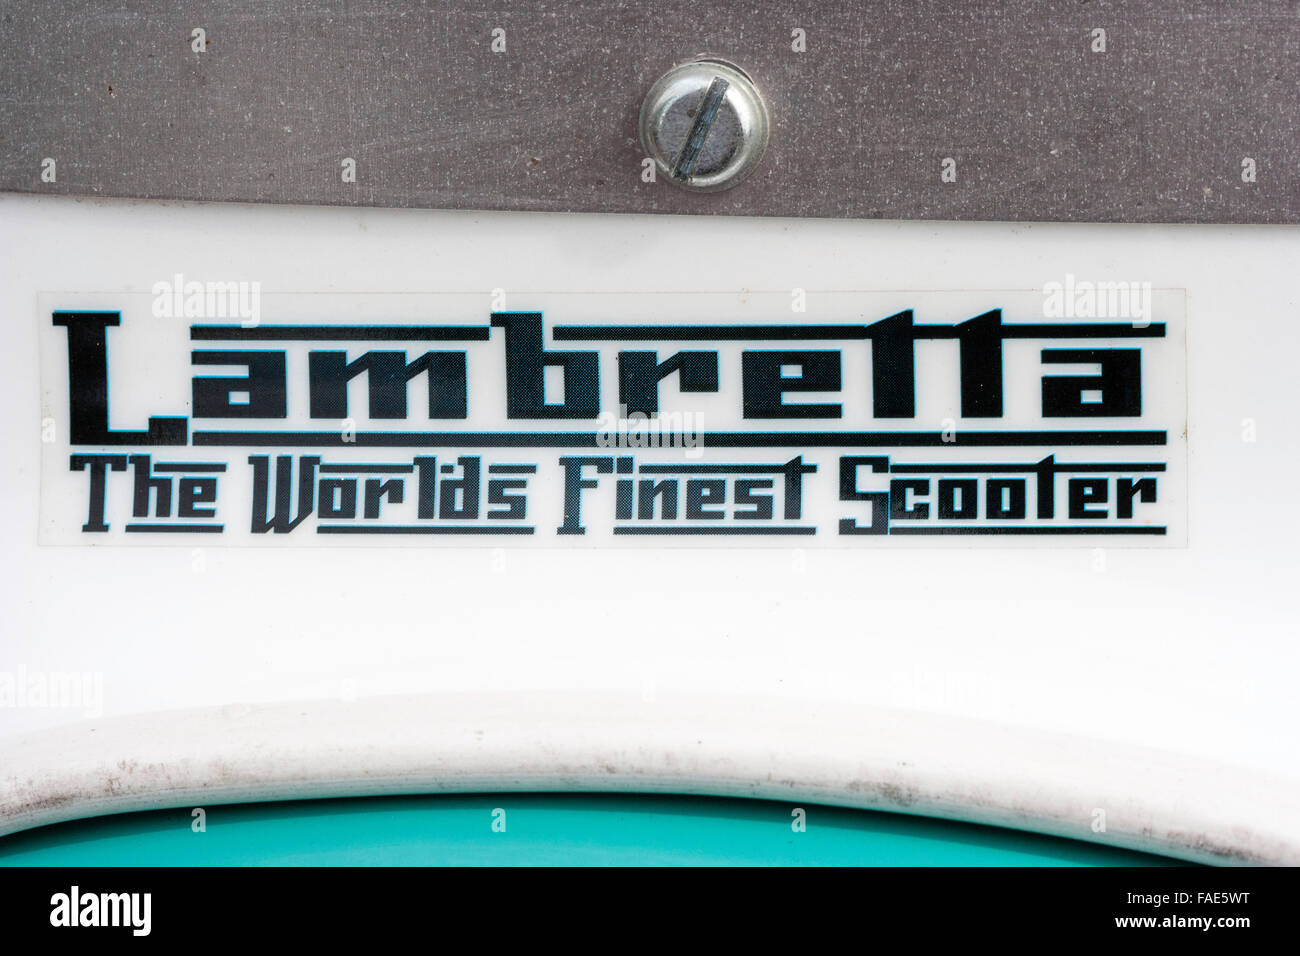 'Lamrella, The world's finest scooter', logo in dark green against white background. Close up. Stock Photo